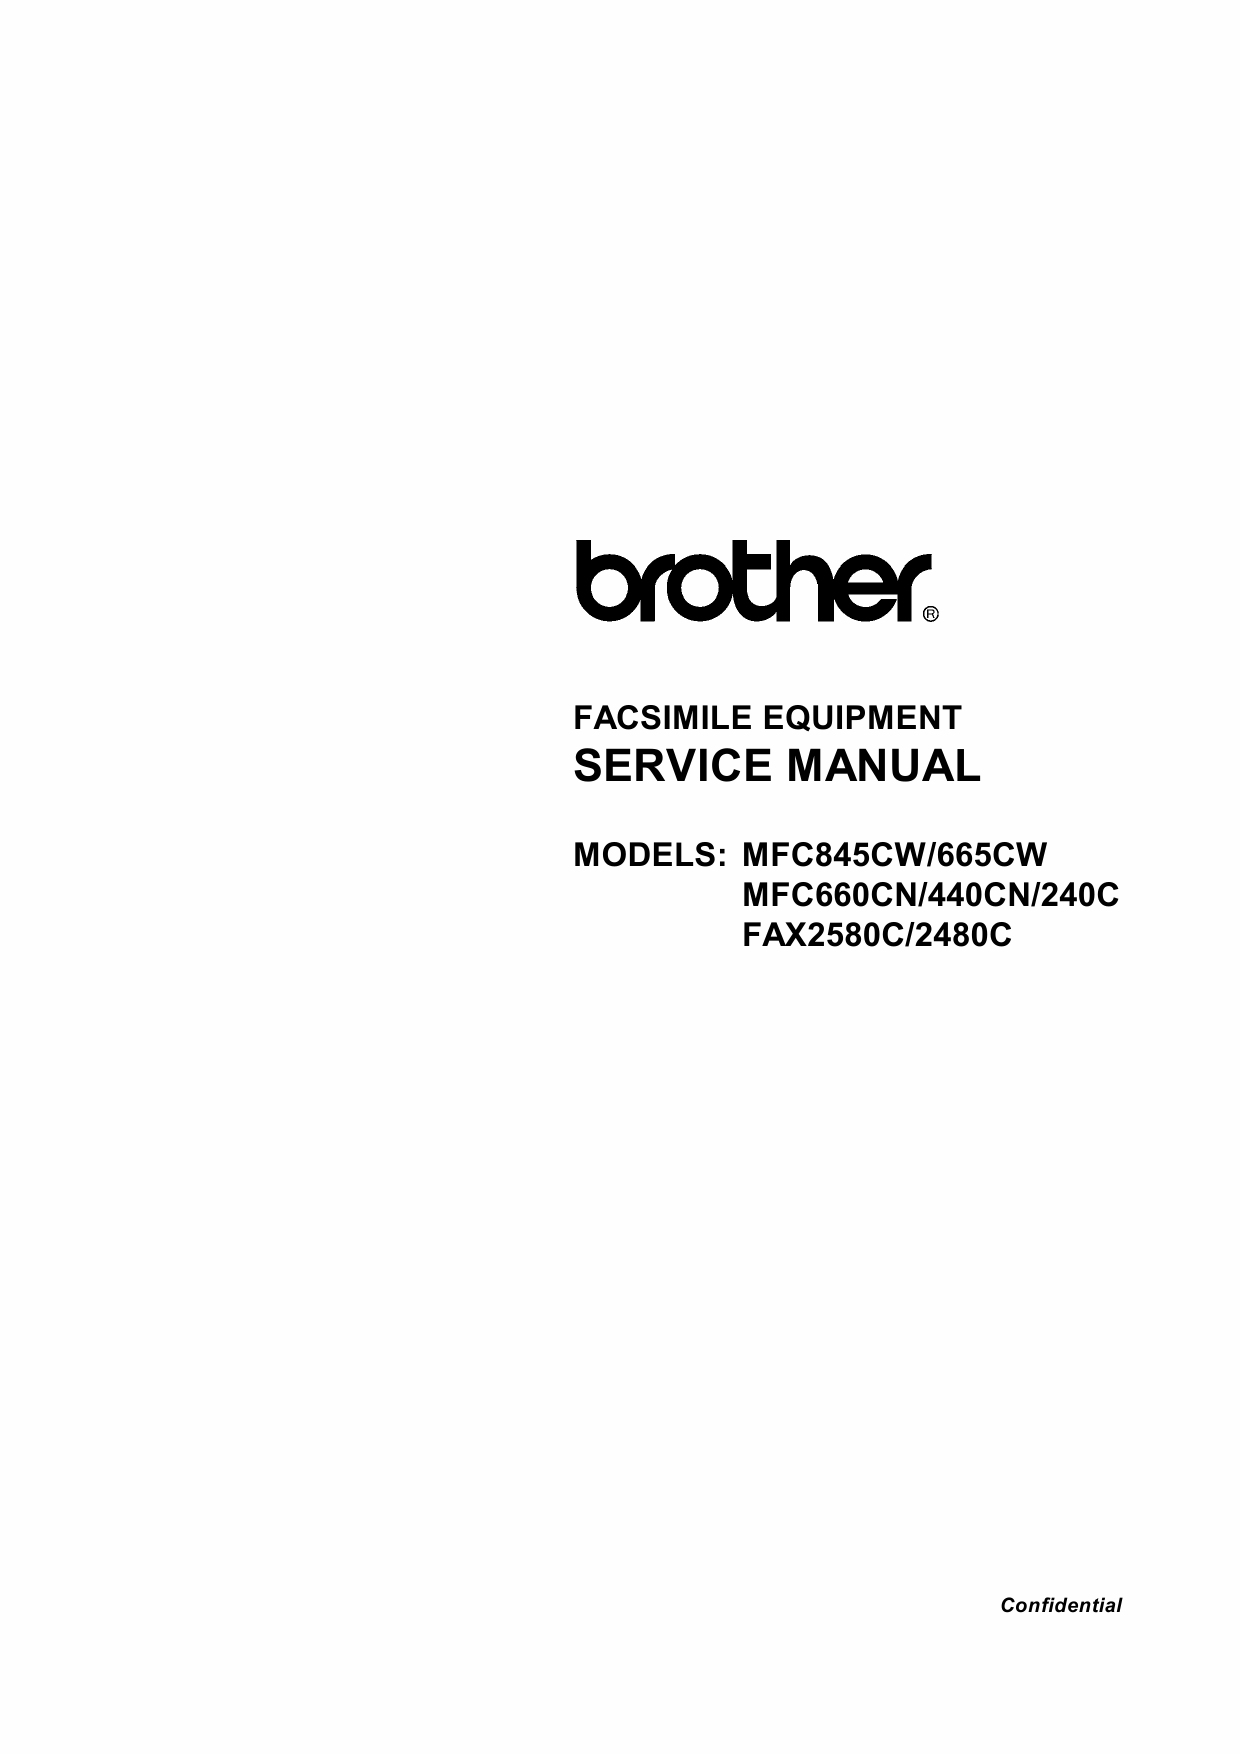 Brother MFC 240 440 660 665 845 C-CW FAX2480C 2580C Service Manual-1